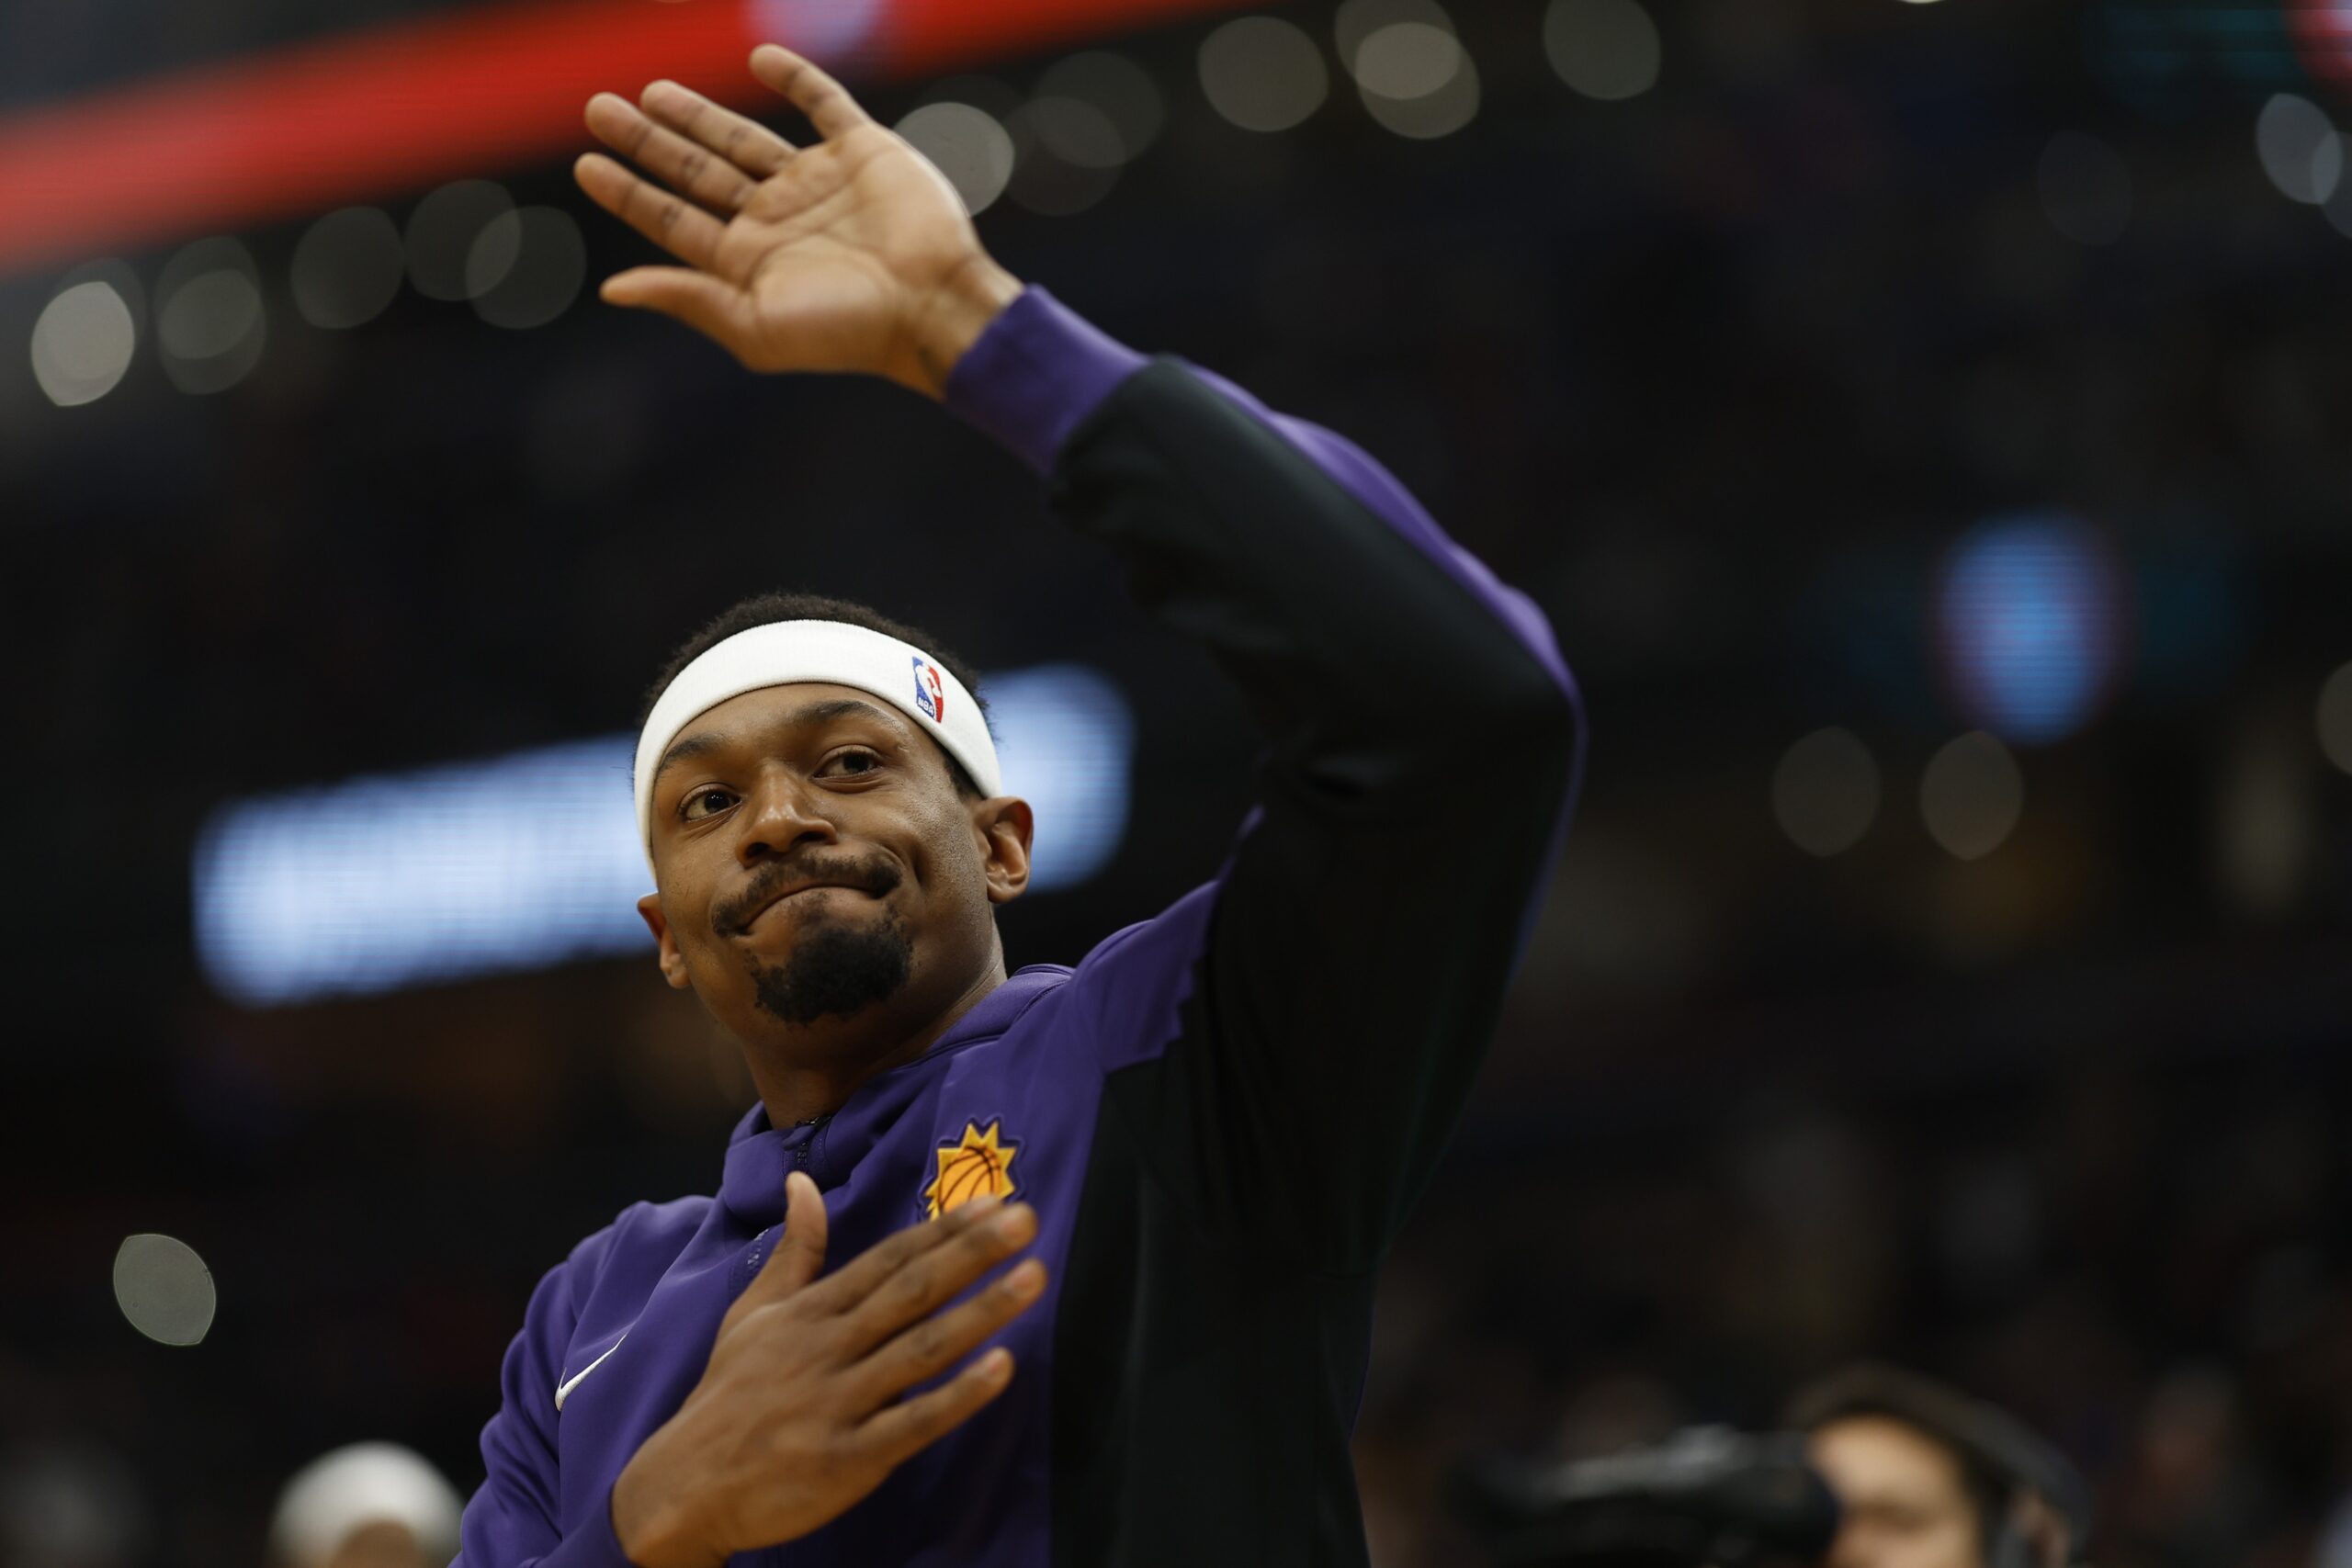 Phoenix Suns guard Bradley Beal (3) waves to the crowd while being introduced prior his return to Washington after being traded in the offseason against the Washington Wizards at Capital One Arena.